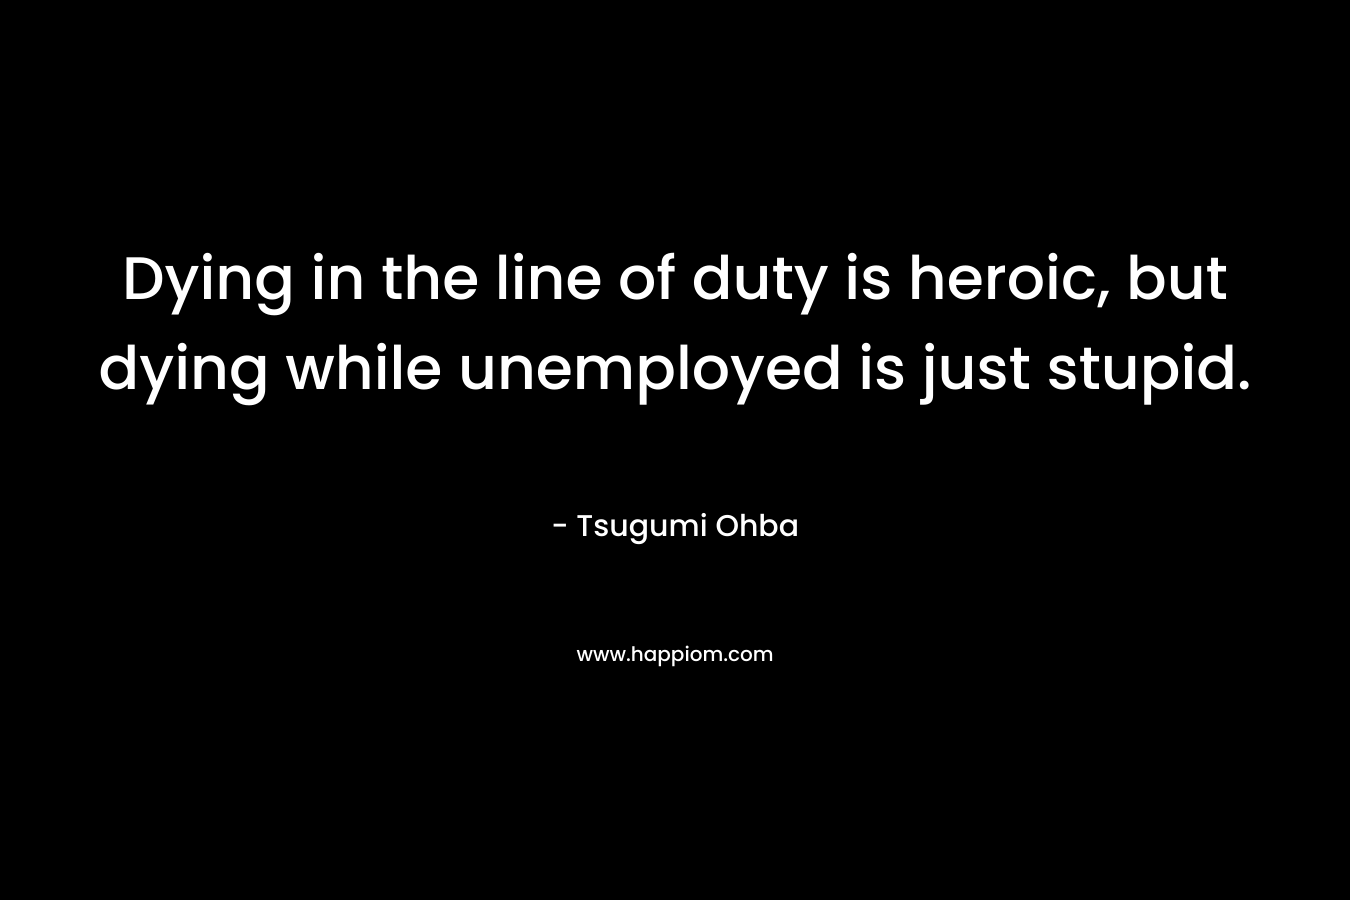 Dying in the line of duty is heroic, but dying while unemployed is just stupid.